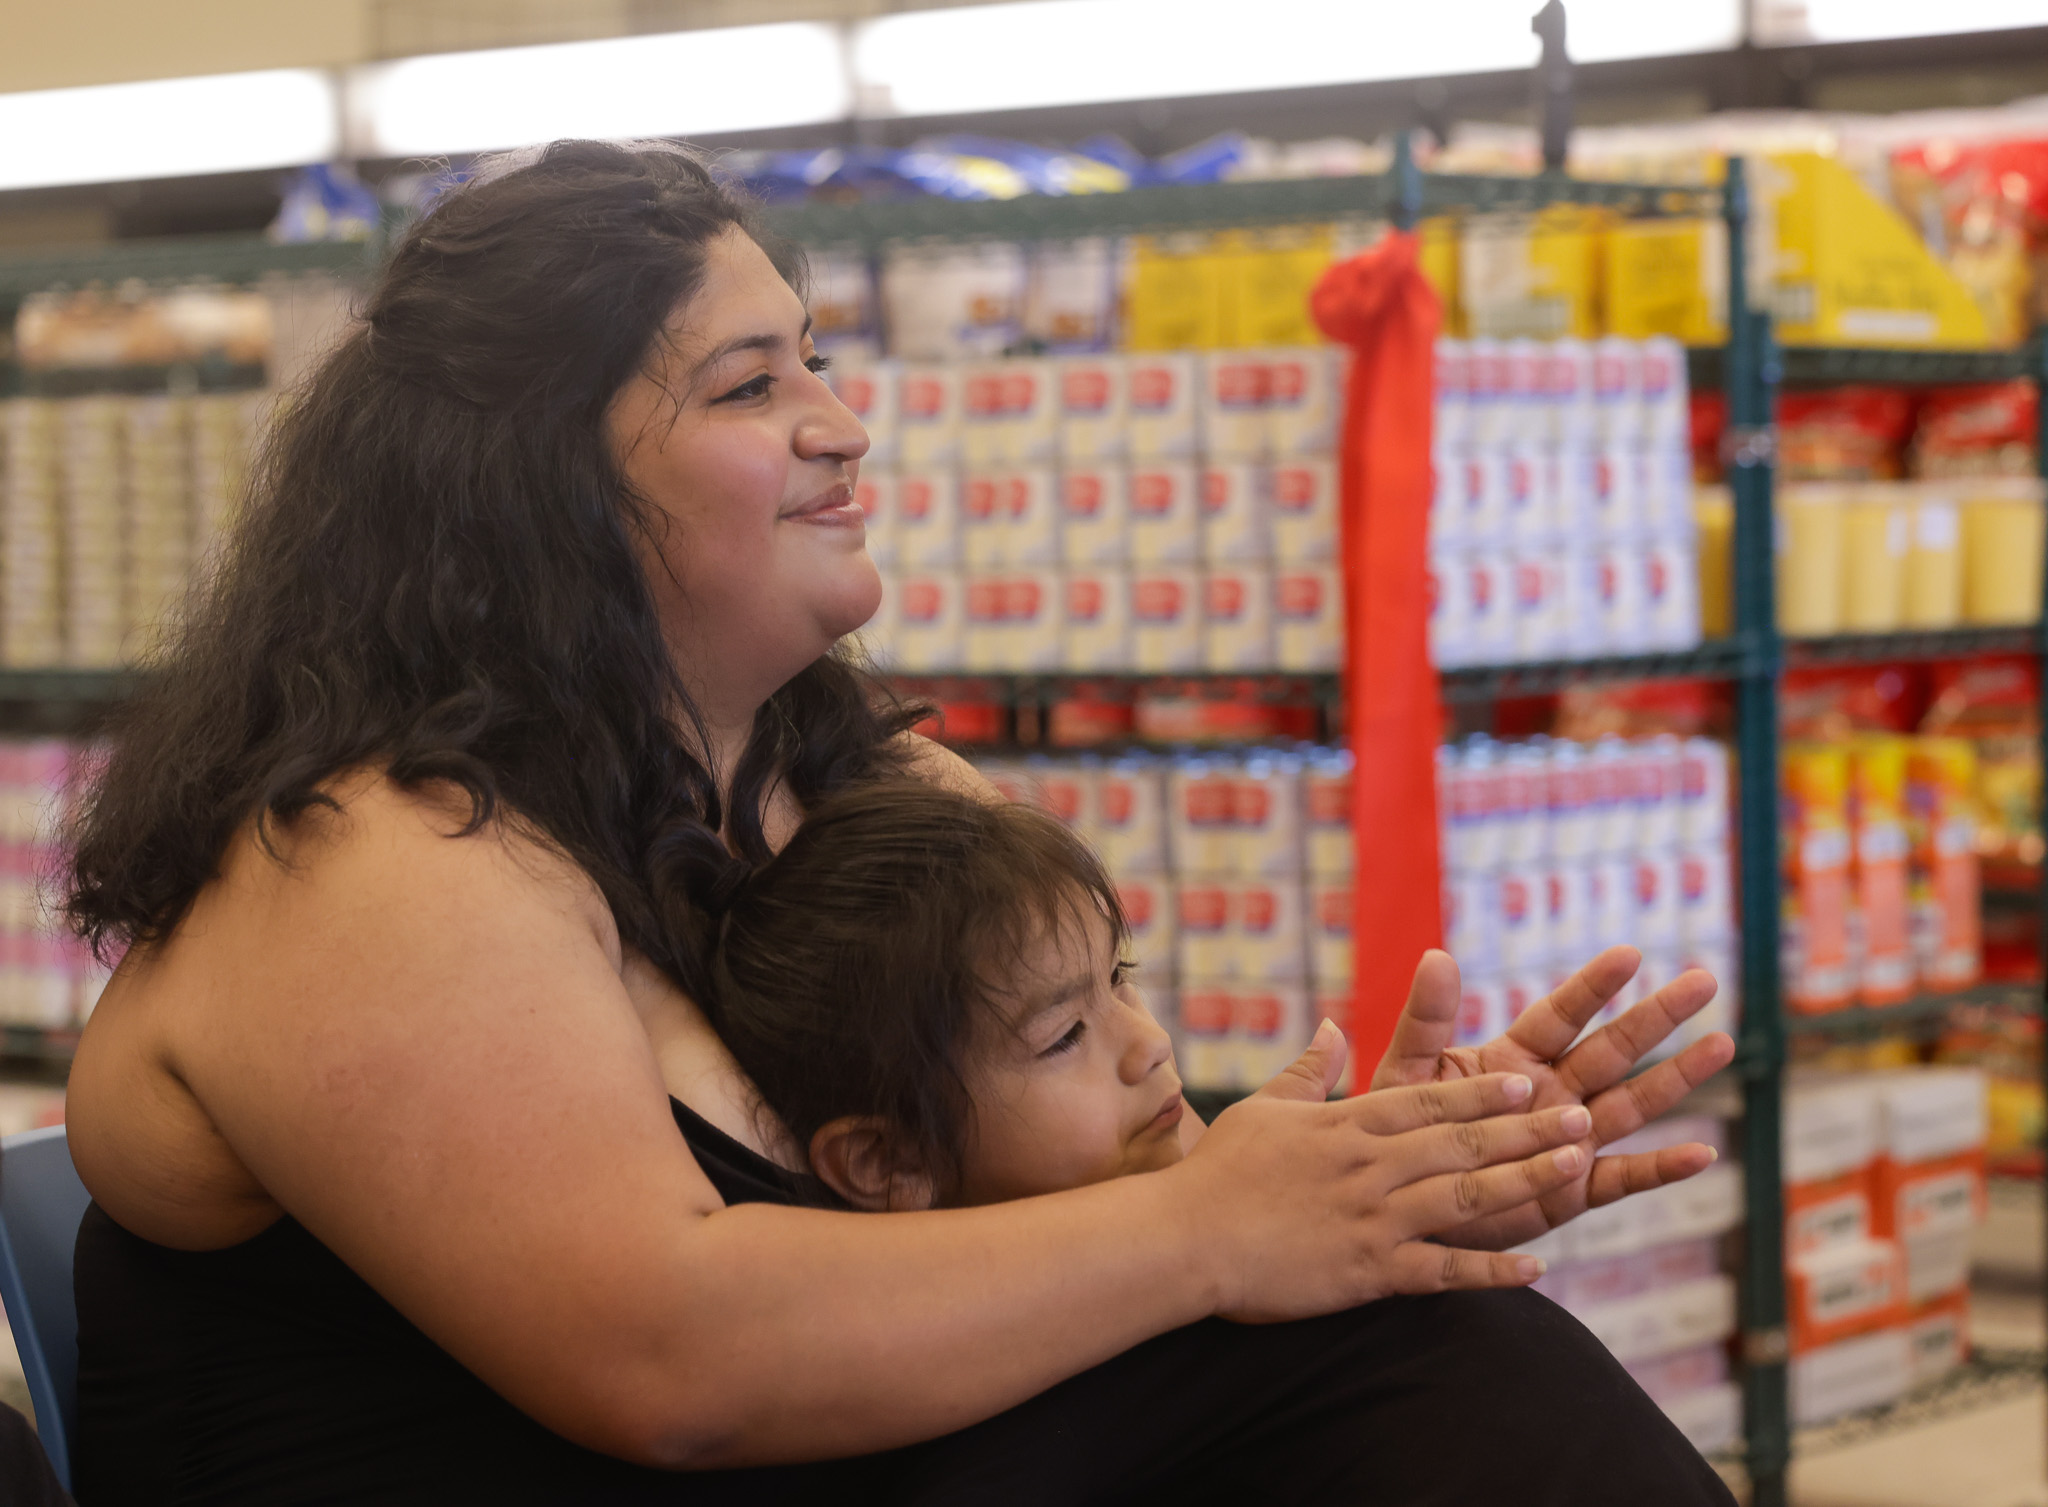 A woman and child are sitting in a store, clapping and smiling. The background shows shelves stocked with various products, including boxes and cans.